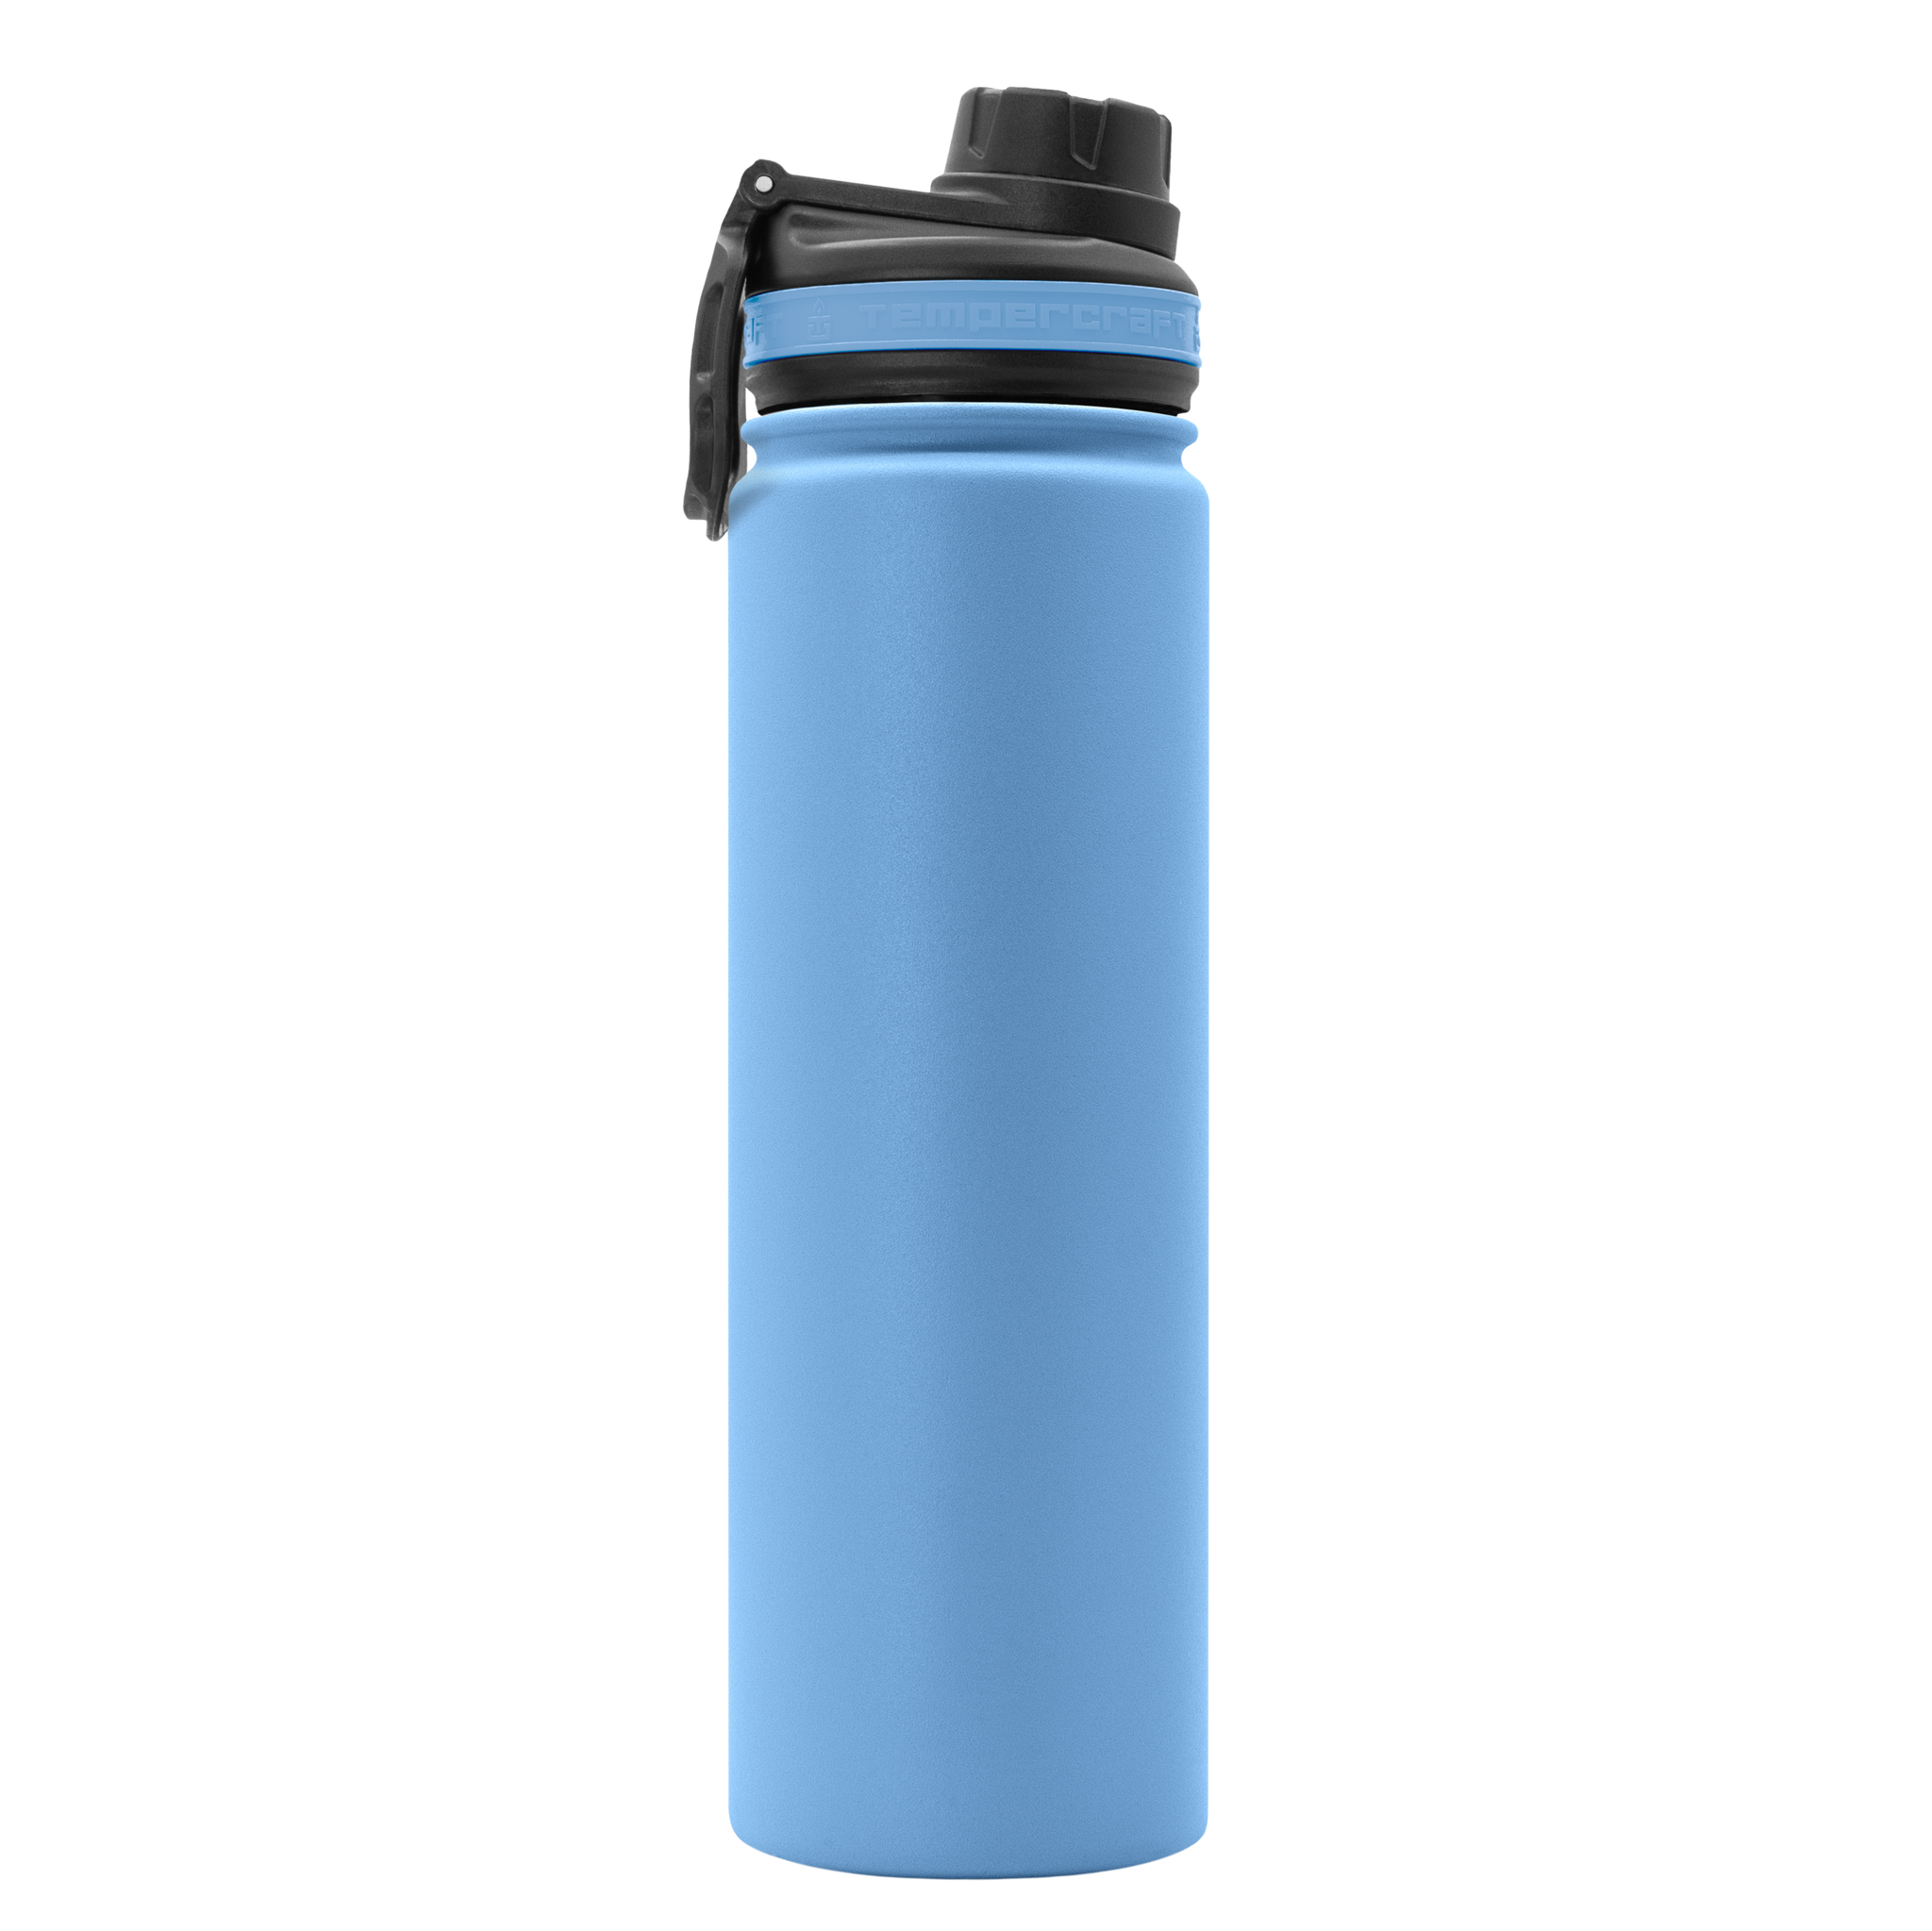 Triple Insulated Stainless Steel Water Bottle with Straw Lid - Flip Top Lid  - Wide Mouth Cap (26 oz) Sports Drink Bottle, Keeps Hot and Cold - Great